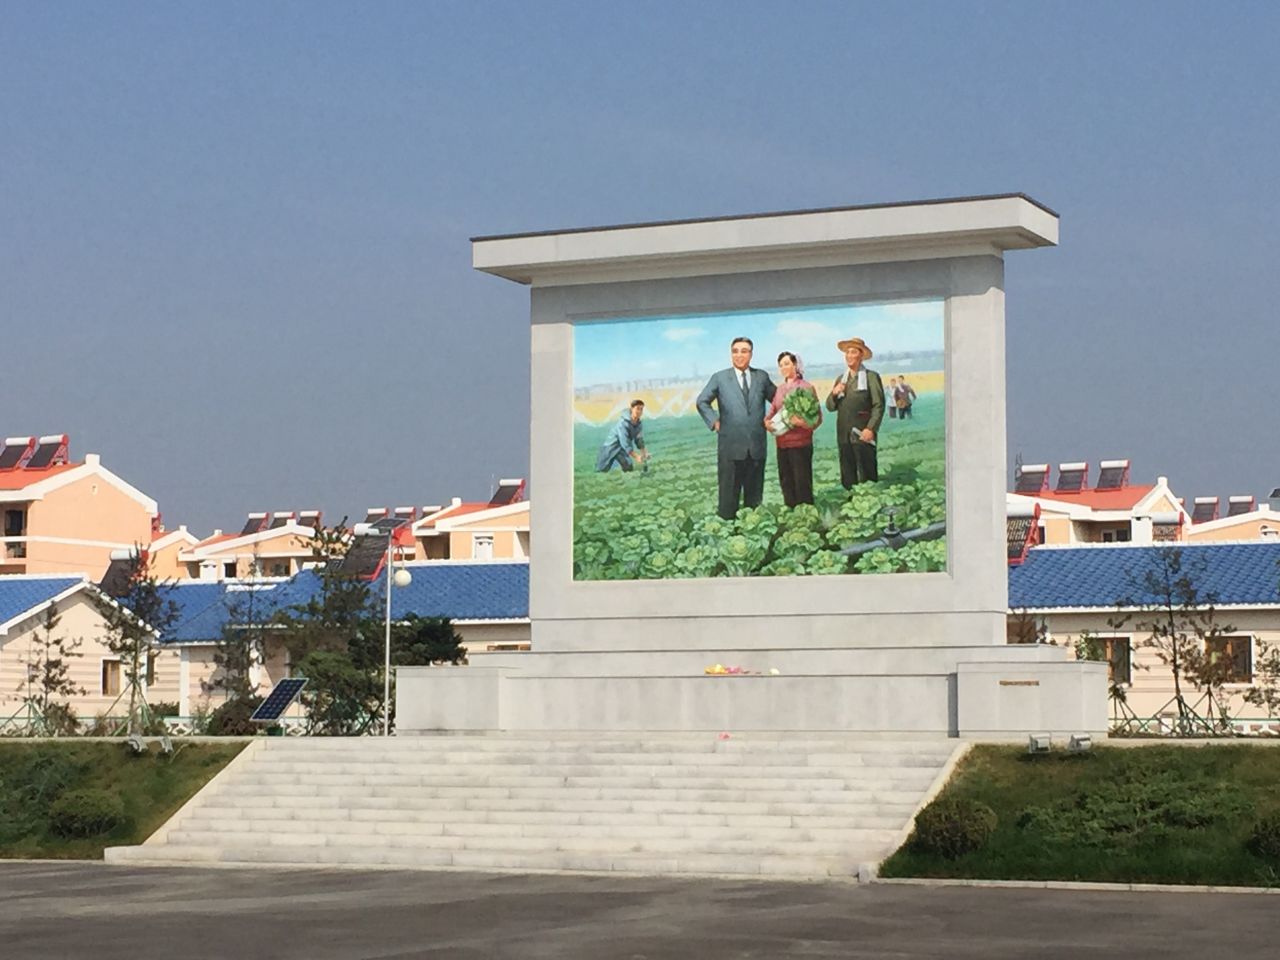 A large mural of North Korean founder Kim Il Sung stands outside the Jang Chon cooperative farm, a 30-minute drive outside the capital Pyongyang. <a href="http://www.cnn.com/2015/09/25/asia/north-korea-most-famous-farmer/">CNN visited the farm in September 2015.</a>